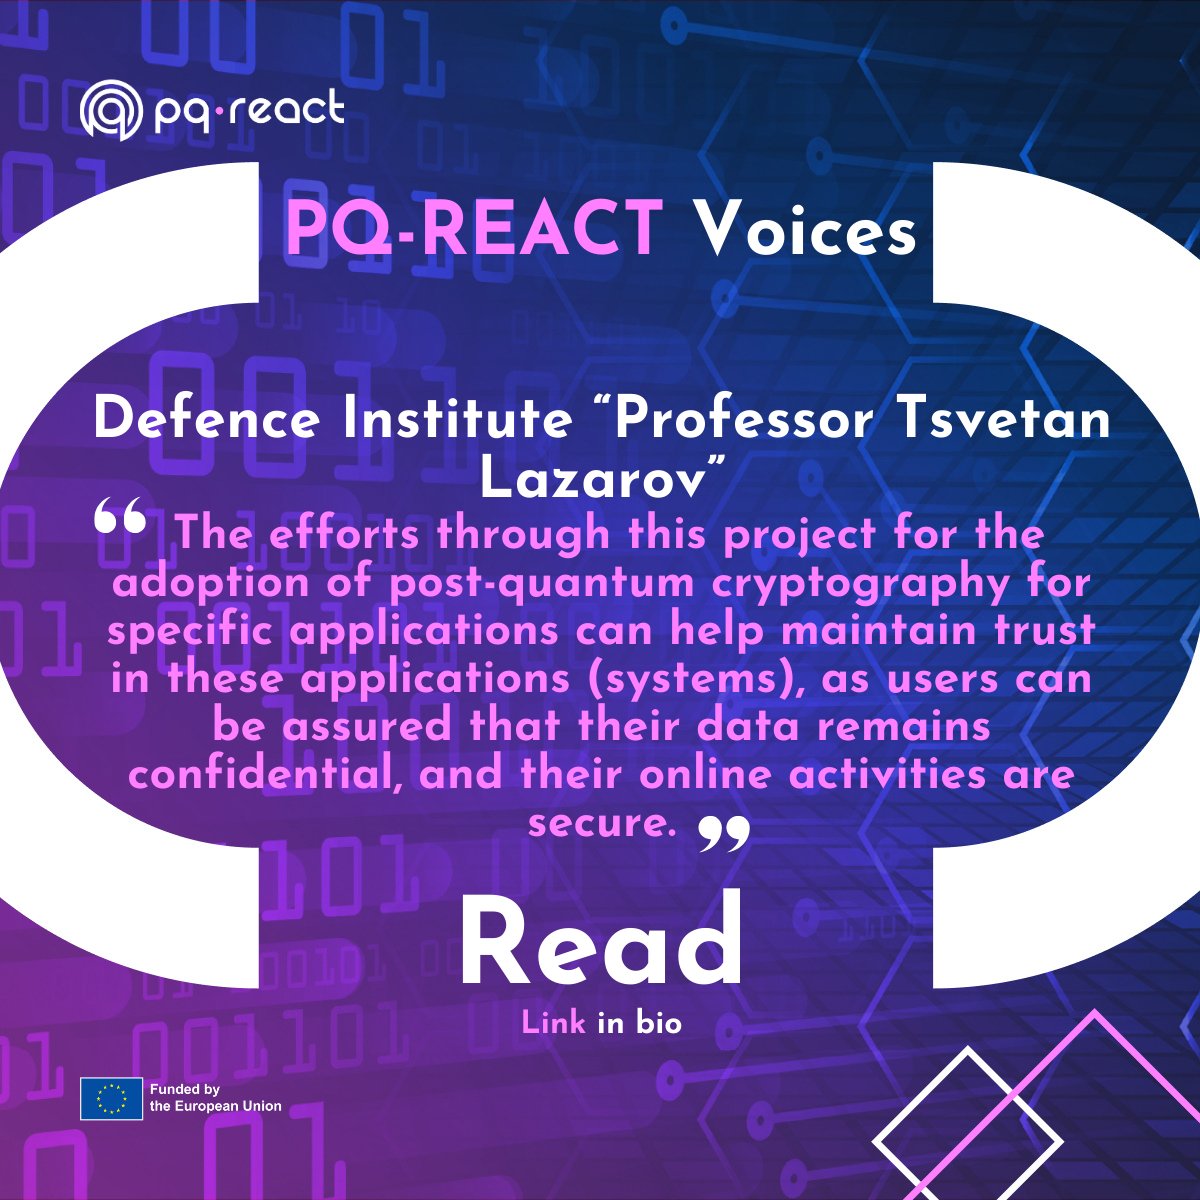 📣 #PQREACTvoices
🎙 Let's hear some thoughts from our consortium members!
📎Reveal the full story of the Defence Institute “Professor Tsvetan Lazarov” (BDI):rb.gy/16bh08
#pqreact #Quantumcomputing #QuantumTechnology